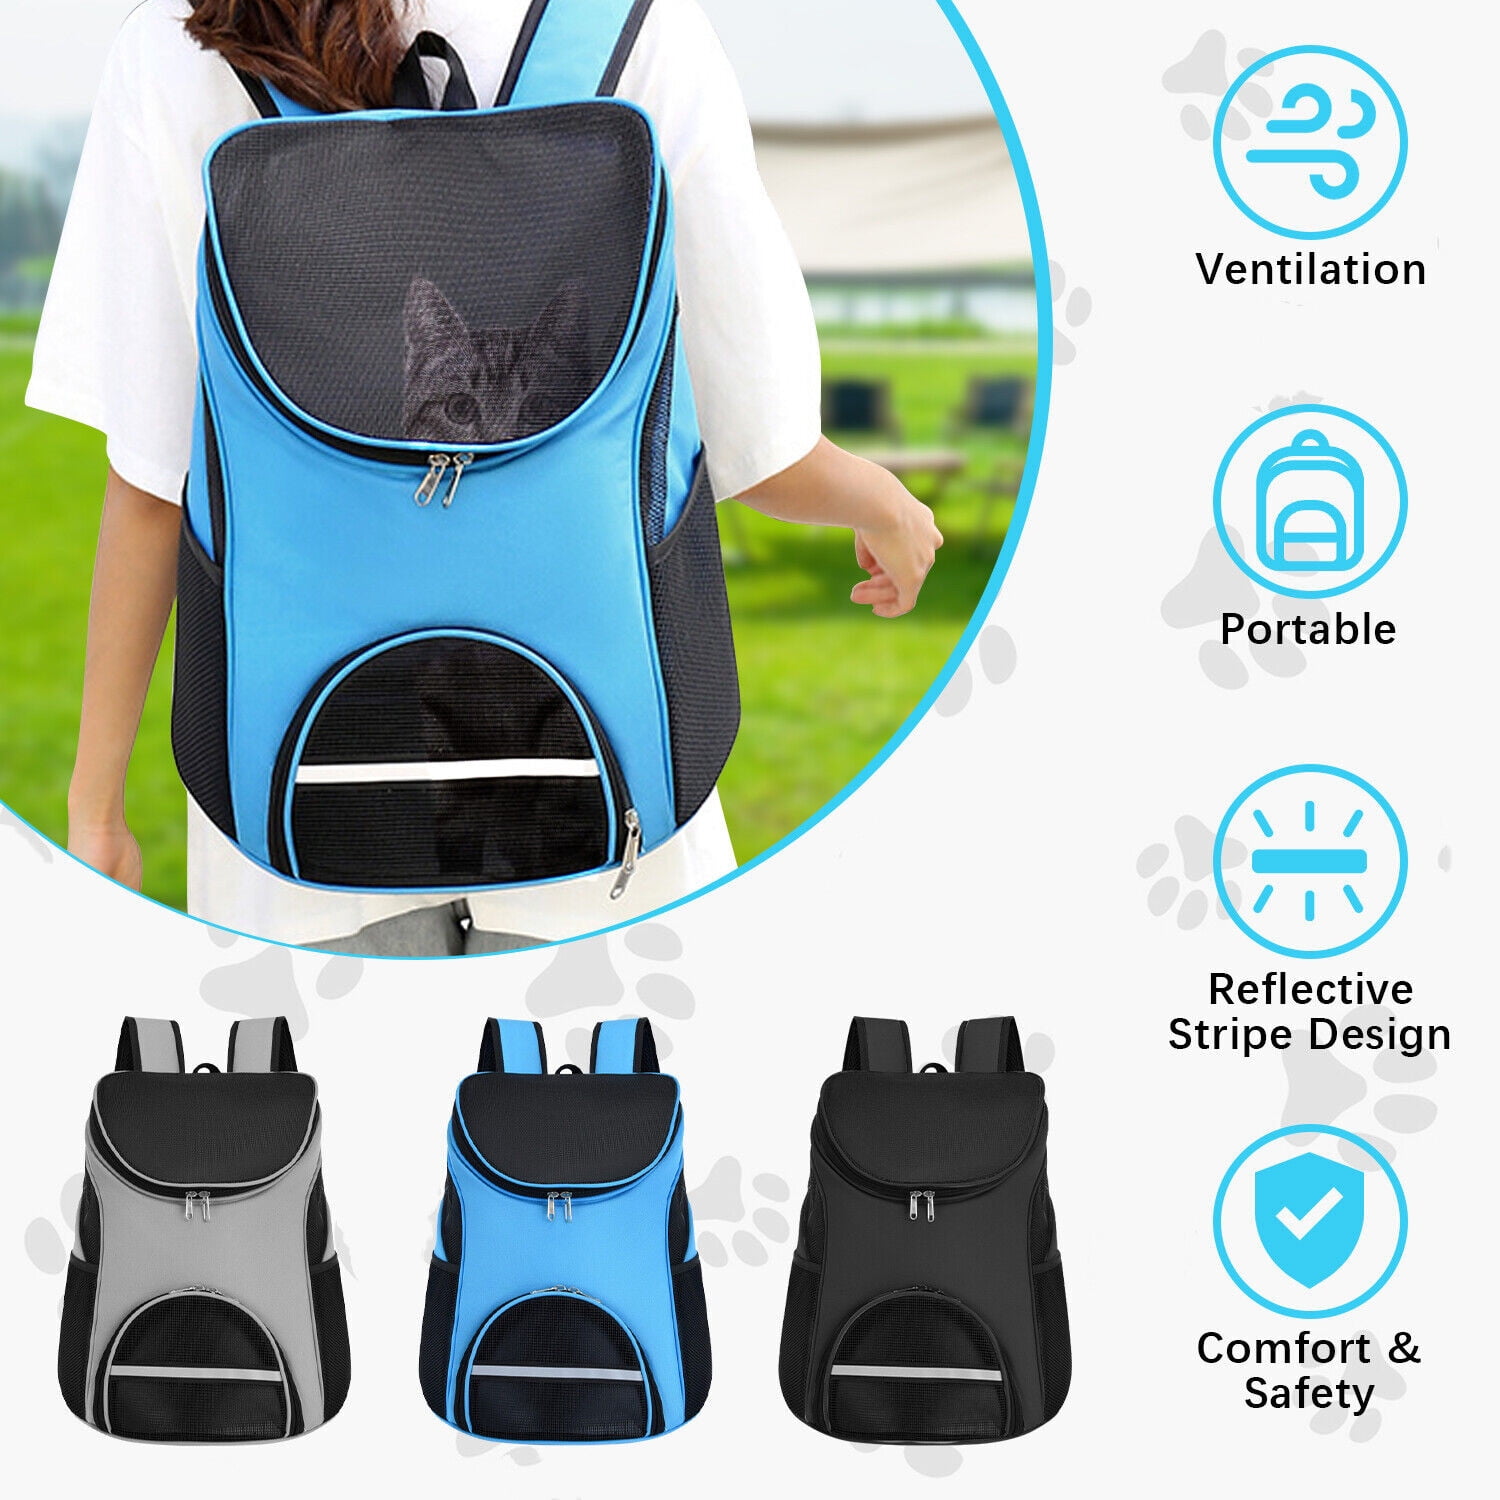 Tucker Murphy Pet™ Pet Carrier Backpack For Cats, Dogs And Small Animals,  Portable Pet Travel Carrier, Super Ventilated Design, Airline Approved,  Ideal For Traveling/hiking /camping,black And Gray